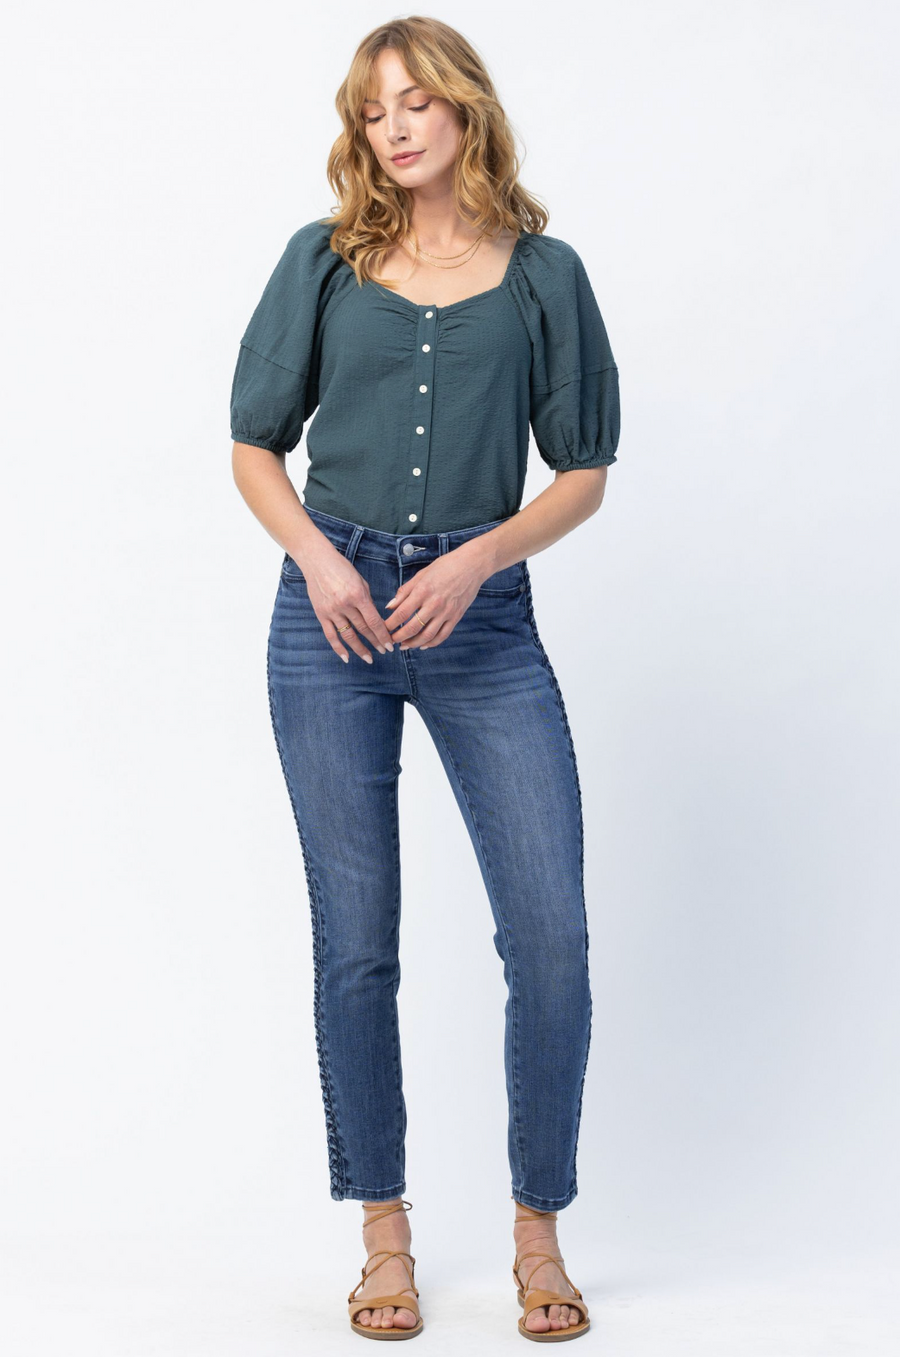 Judy Blue -  Relaxed Fit With Side Braid Detail- Plus Sizes